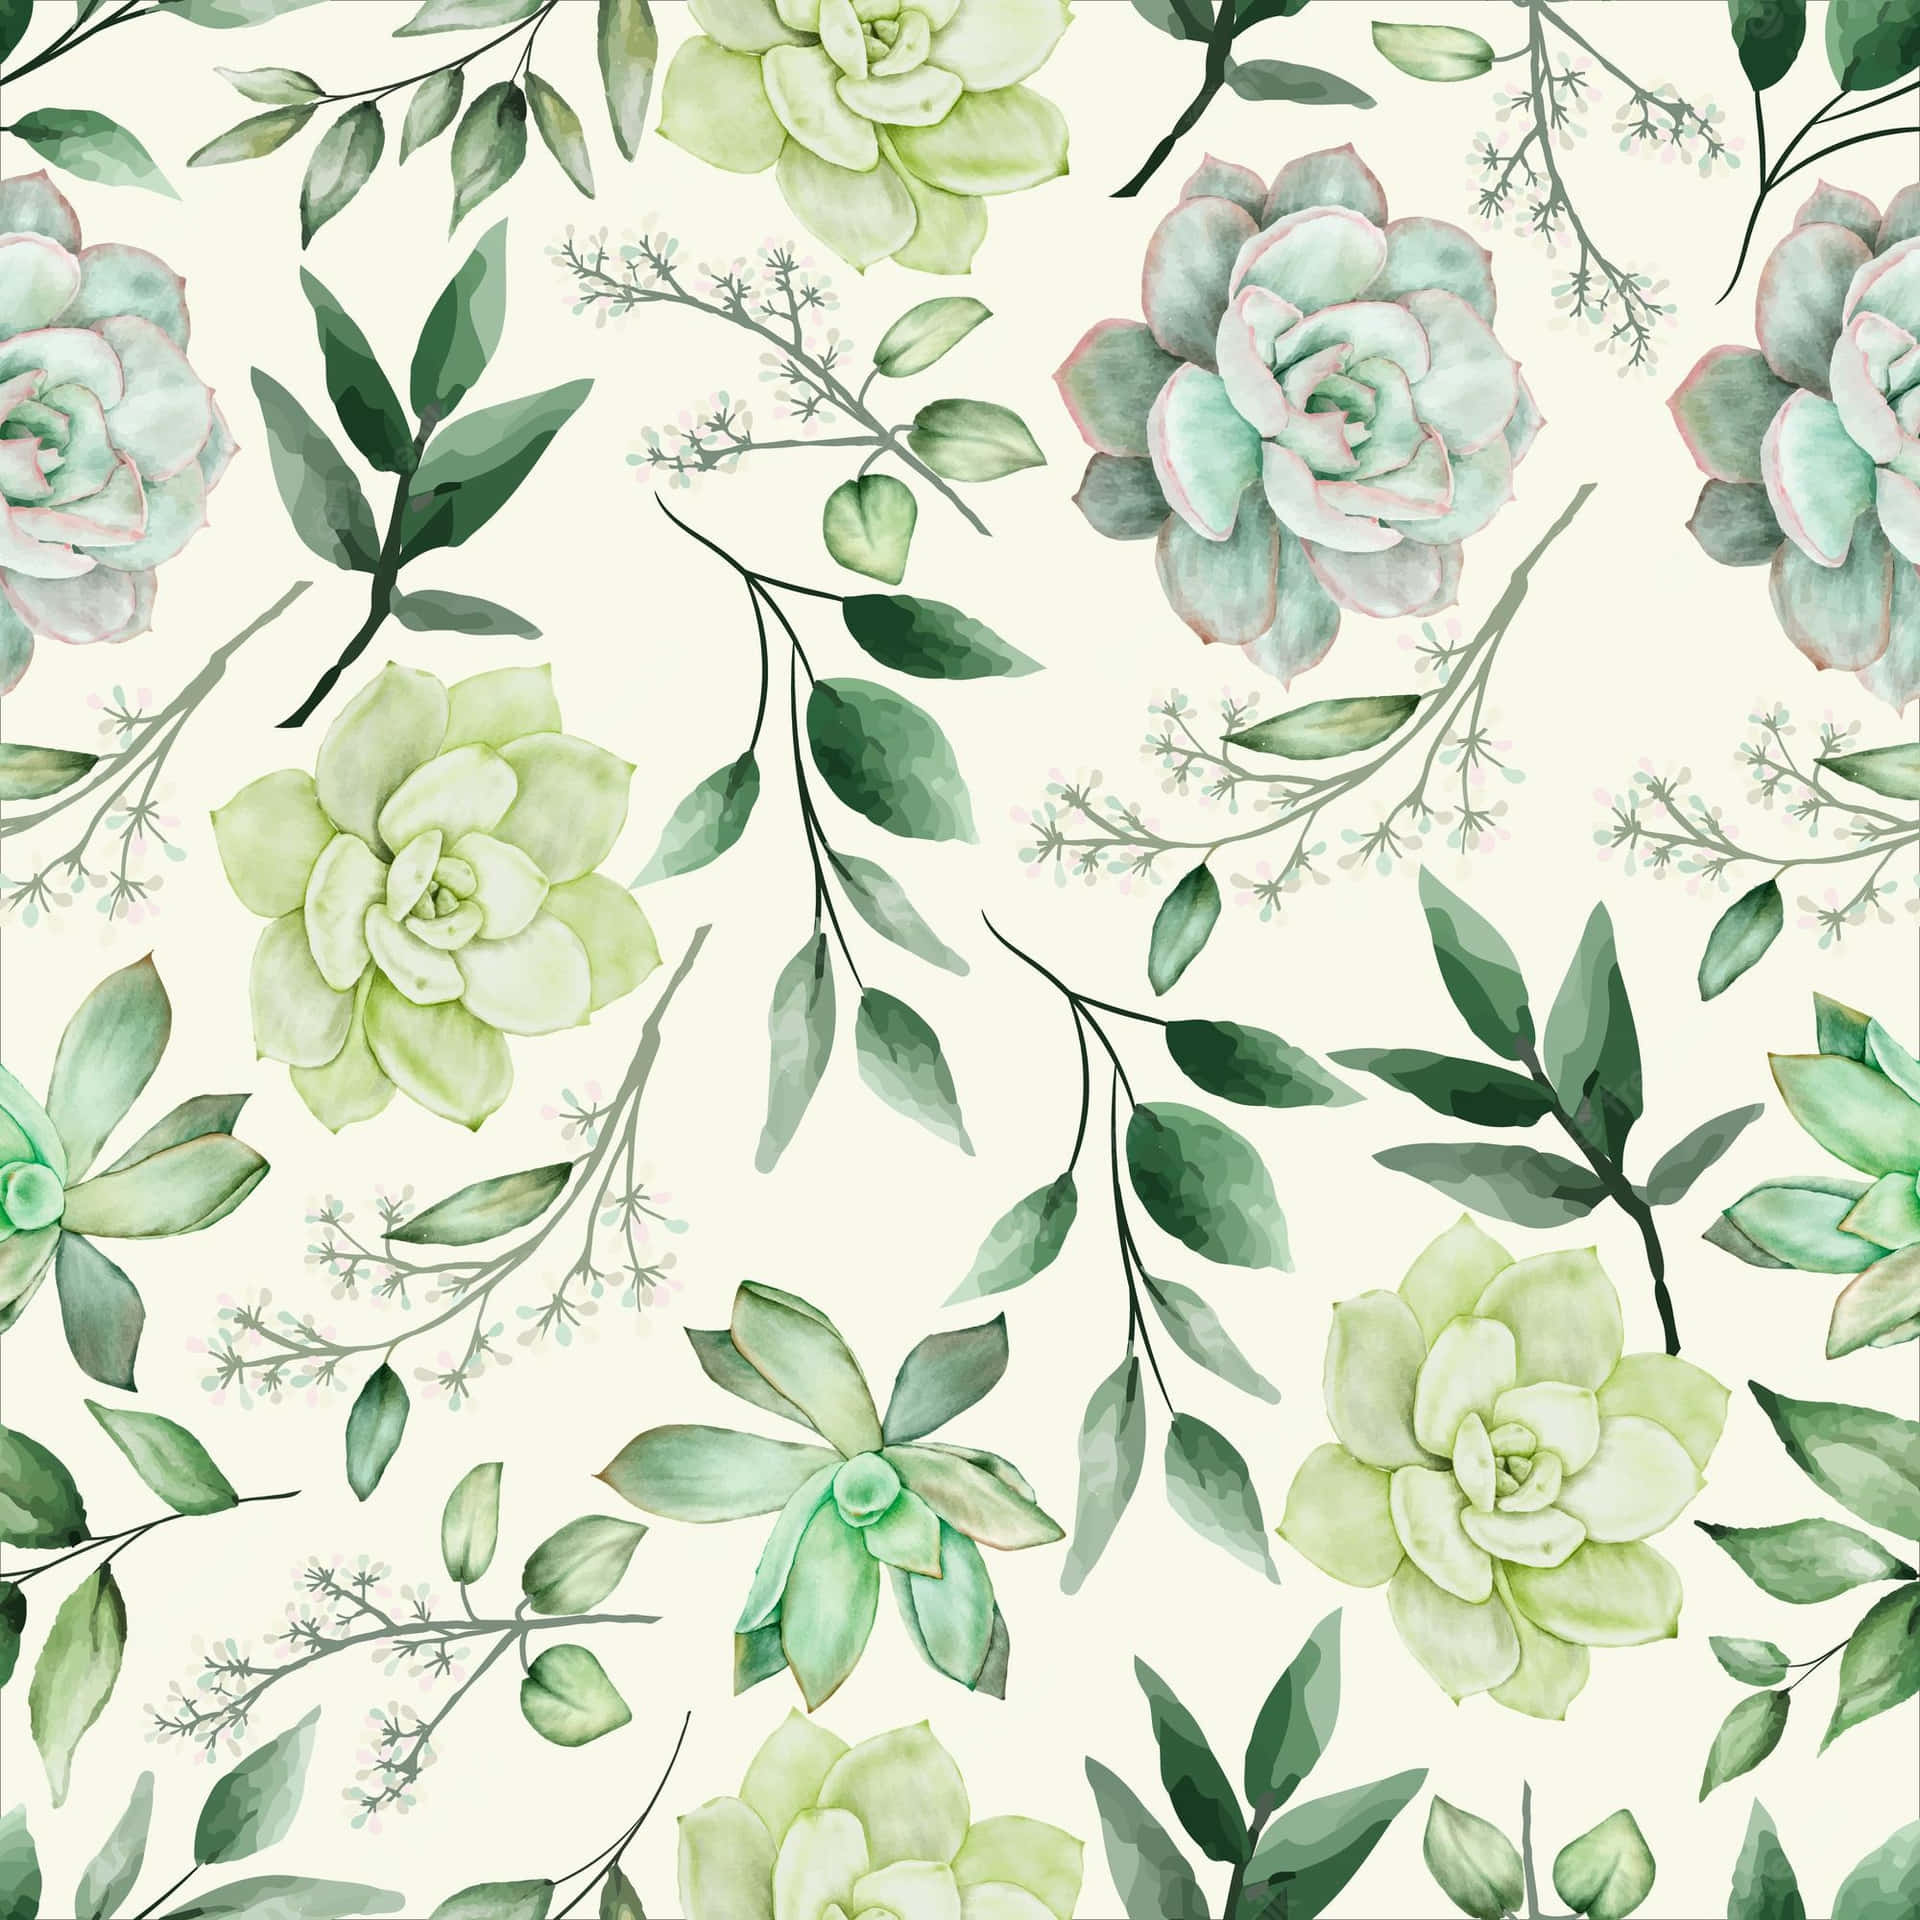 100+] Green Floral Backgrounds